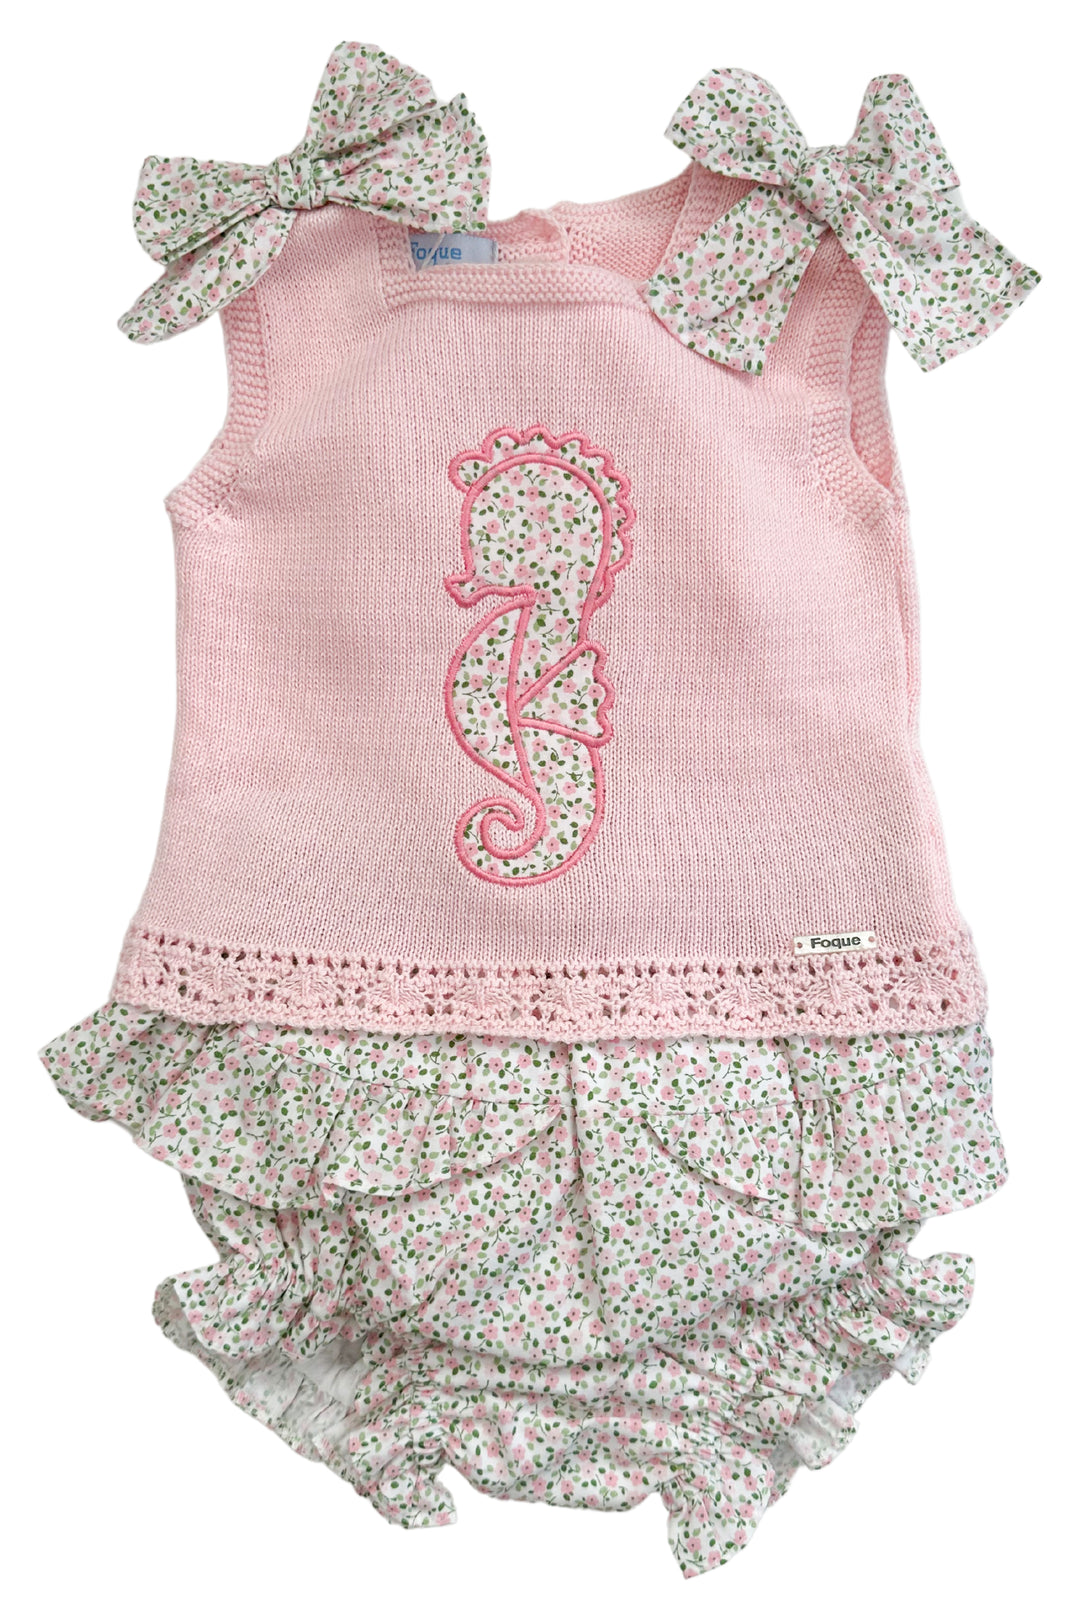 Foque PREORDER "Dafni" Pink Knit Seahorse Top & Bloomers | Millie and John